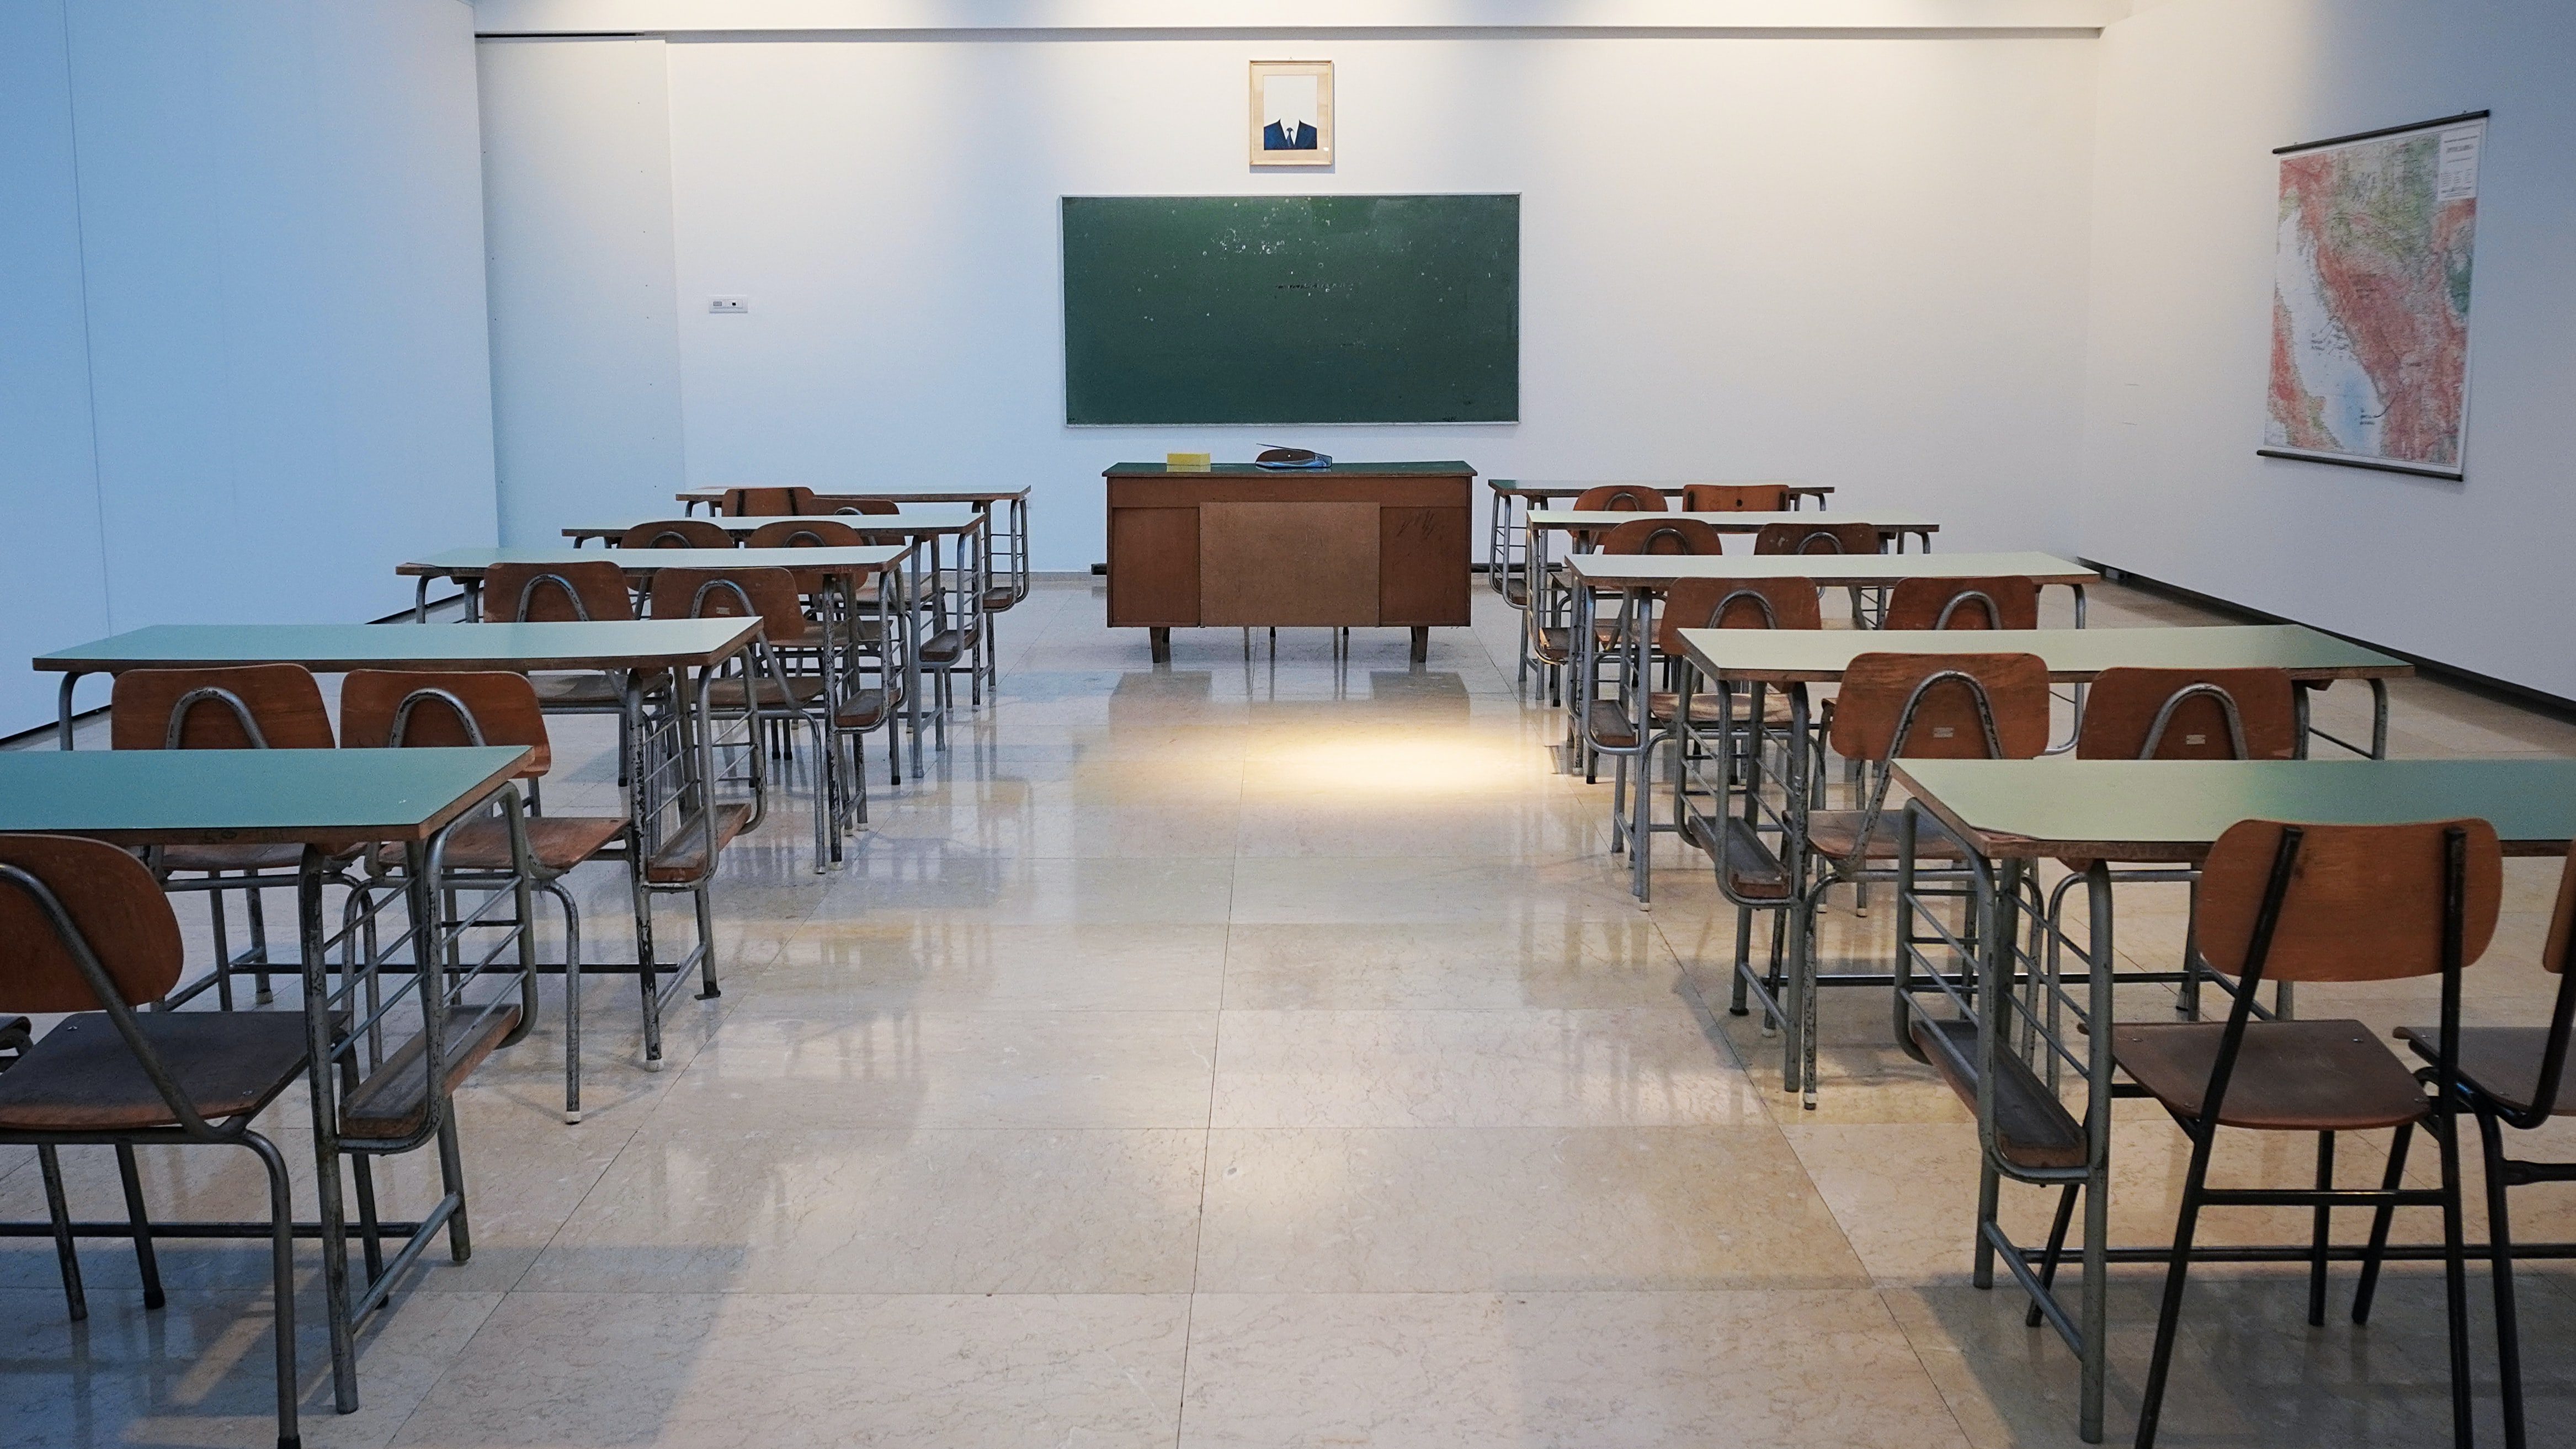 Image showing an empty classroom